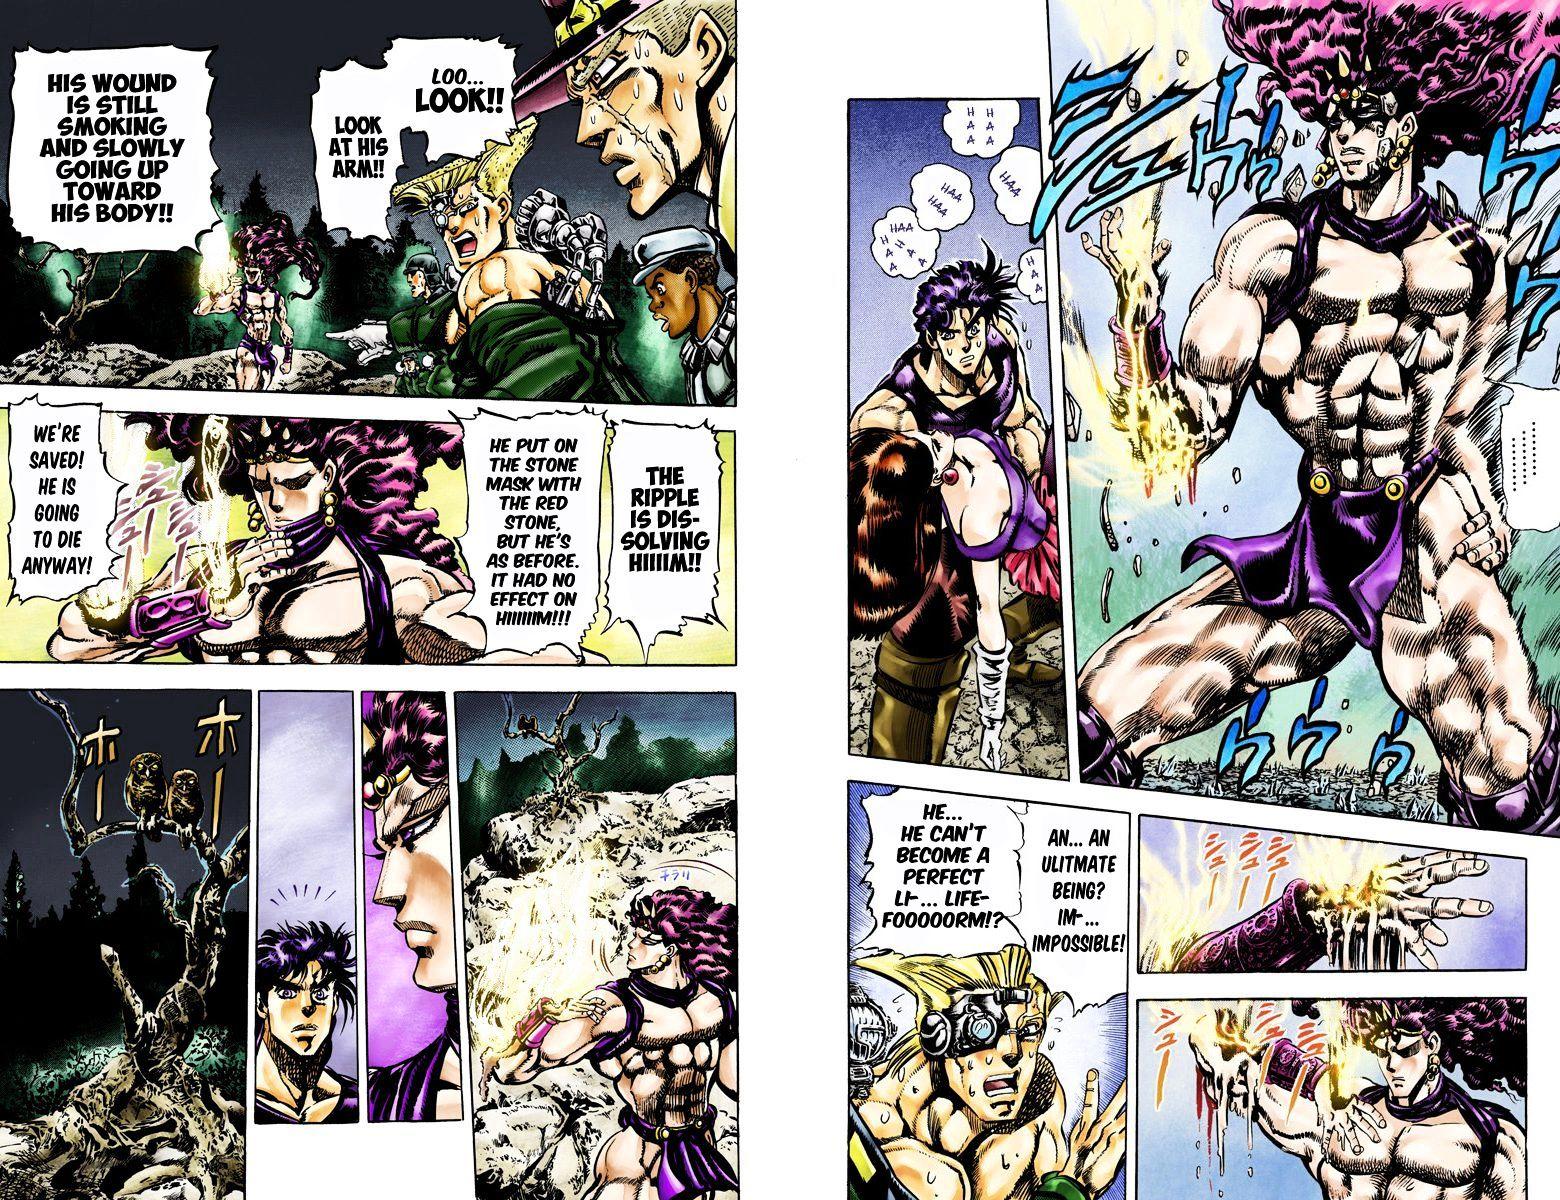 Jojo's Bizarre Adventure Vol.12 Chapter 109 : Birth Of The Ultimate Being (Official Color Scans) page 3 - 